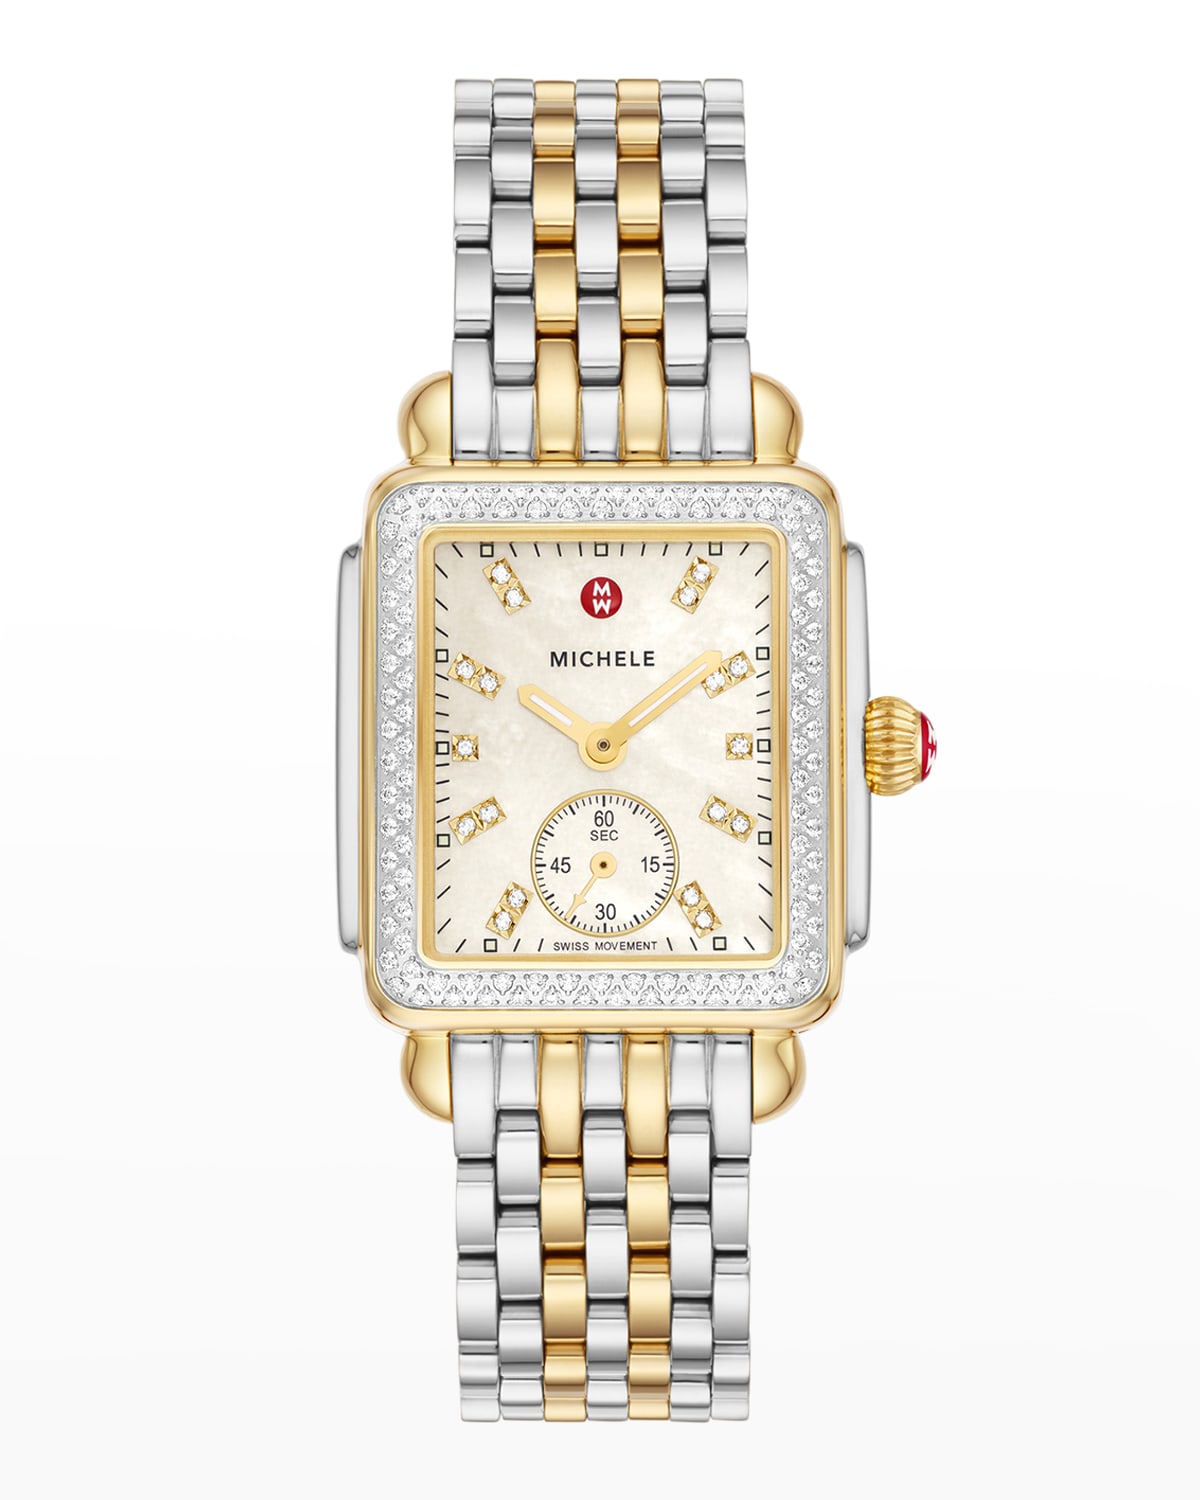 Deco Mid Diamond and Mother-of-Pearl Dial Watch in Two-Tone